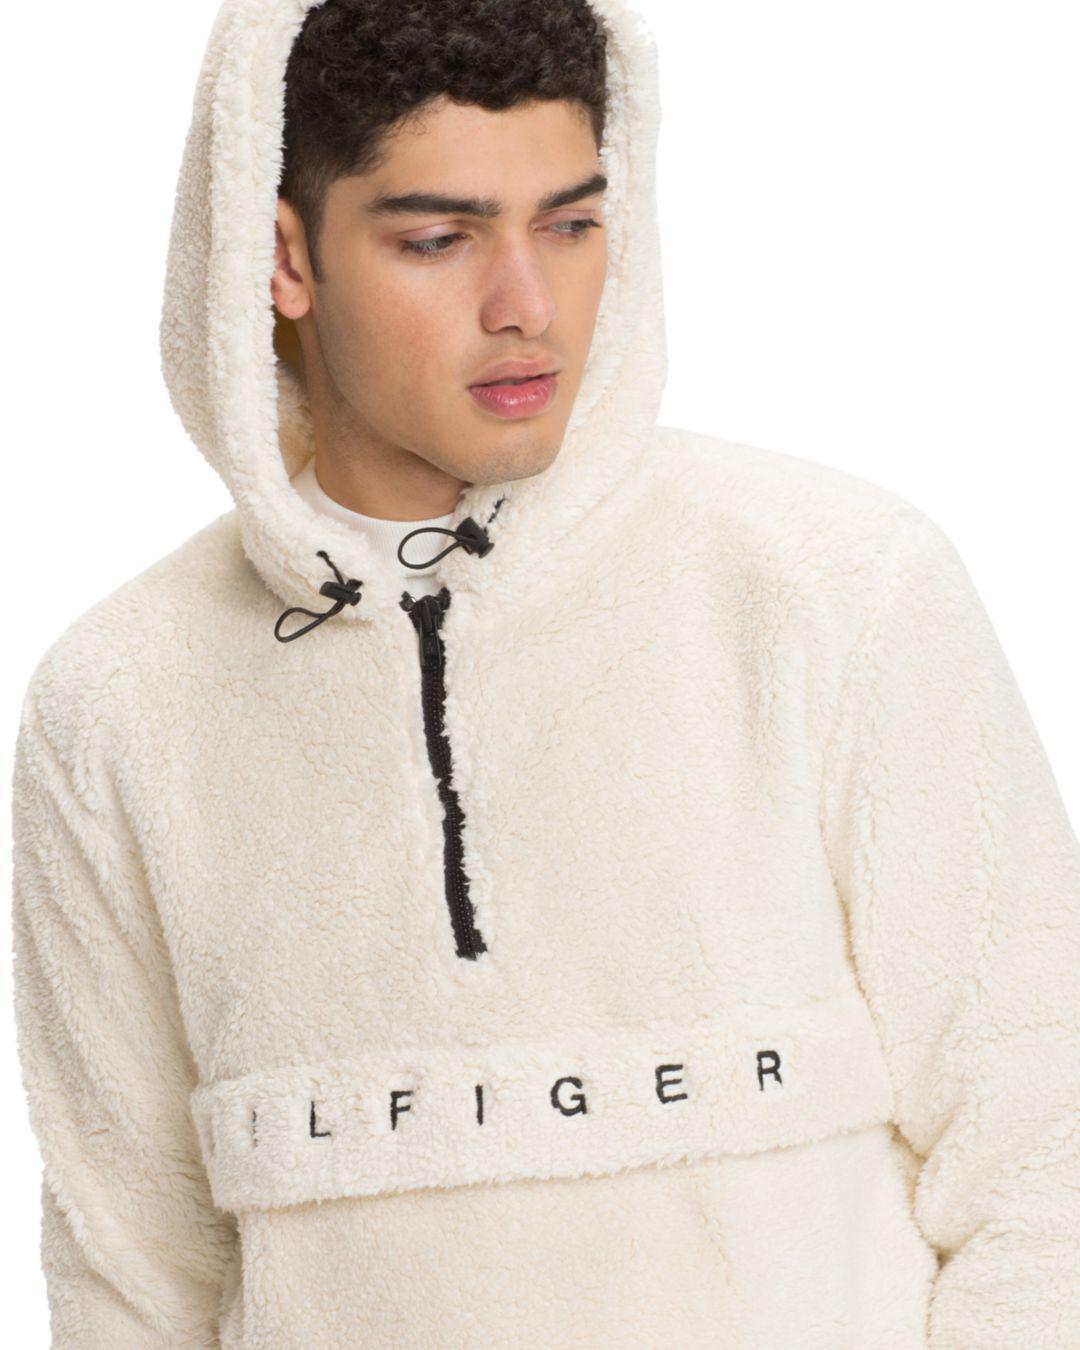 Tommy Hilfiger Oversized Hoodie Discount, 53% OFF | empow-her.com